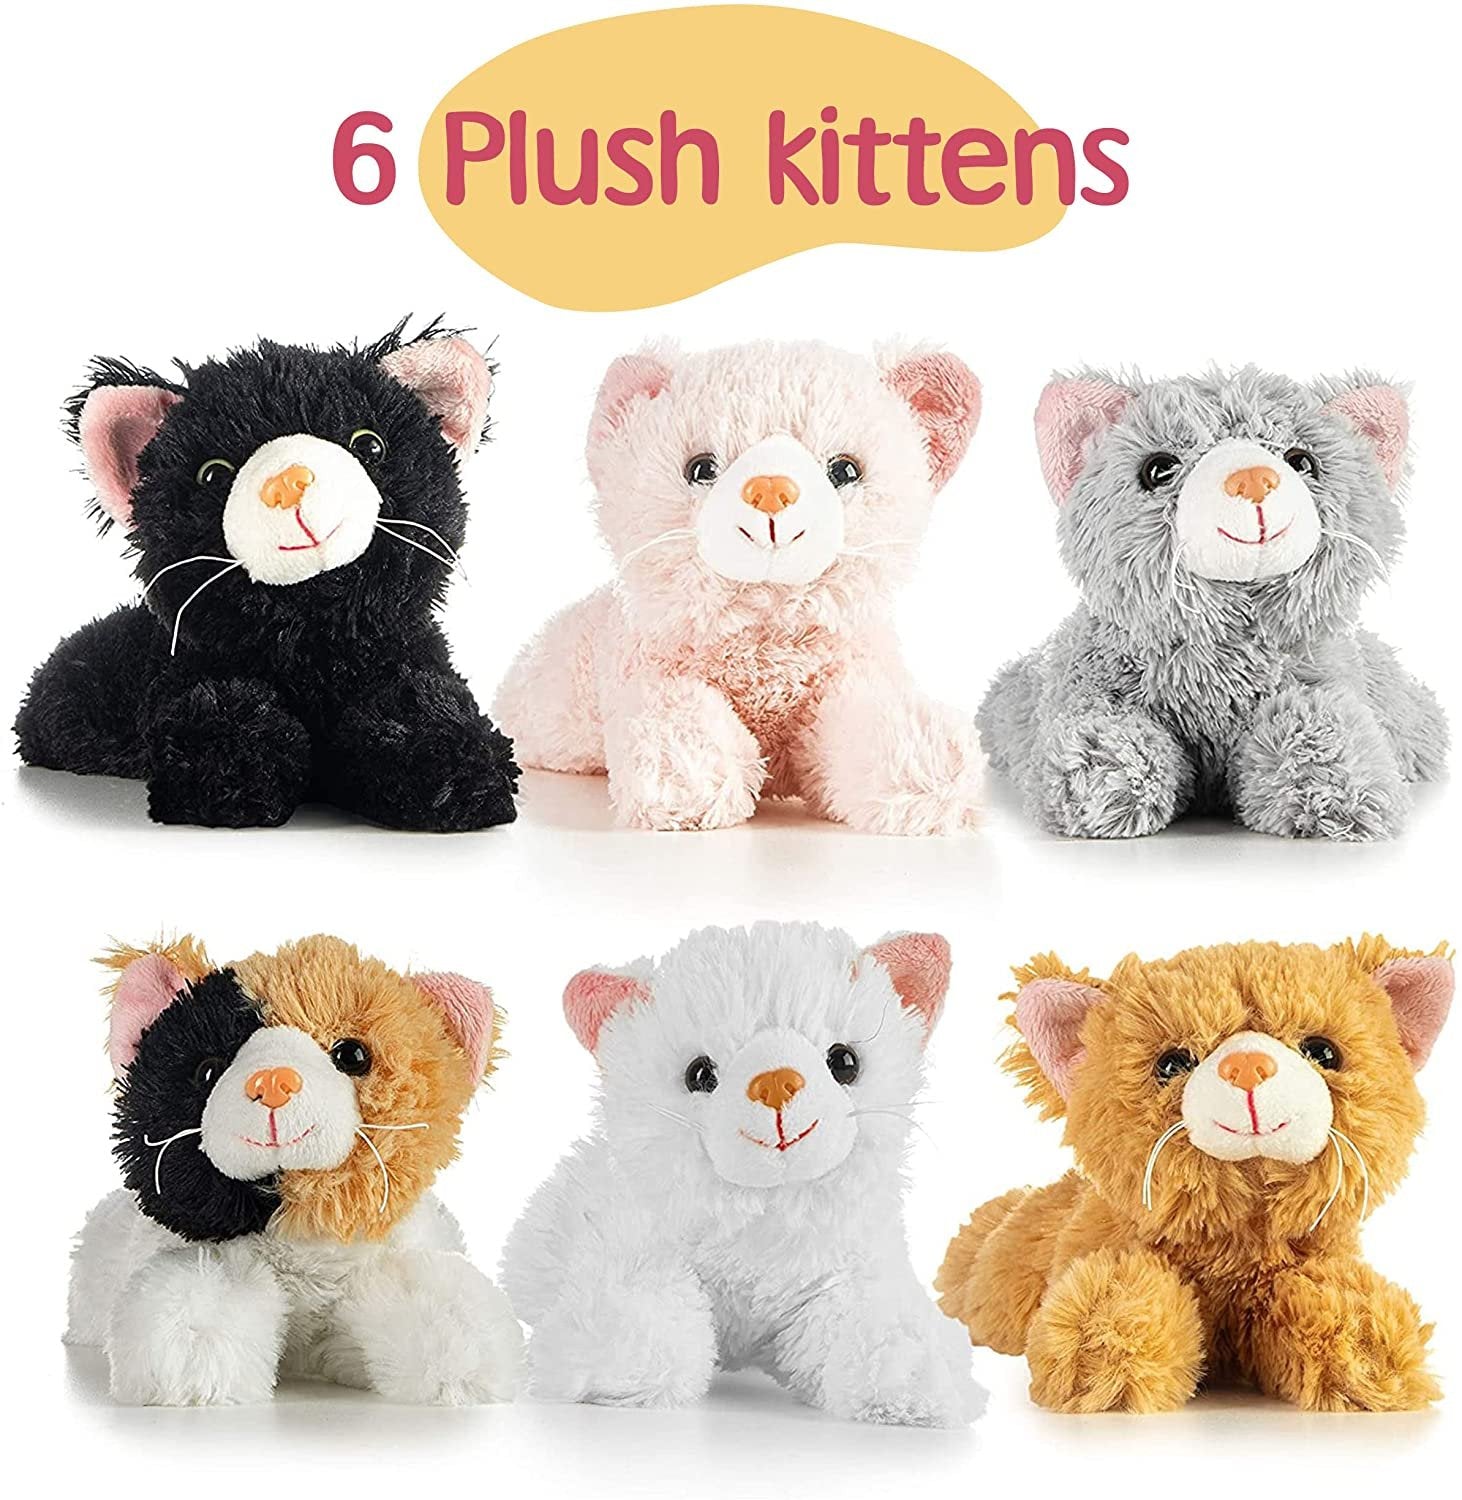 6 inch Multi-color Stuffed Cats - Pack of 6 Plush Kittens Toys for Baby Boys/Girls